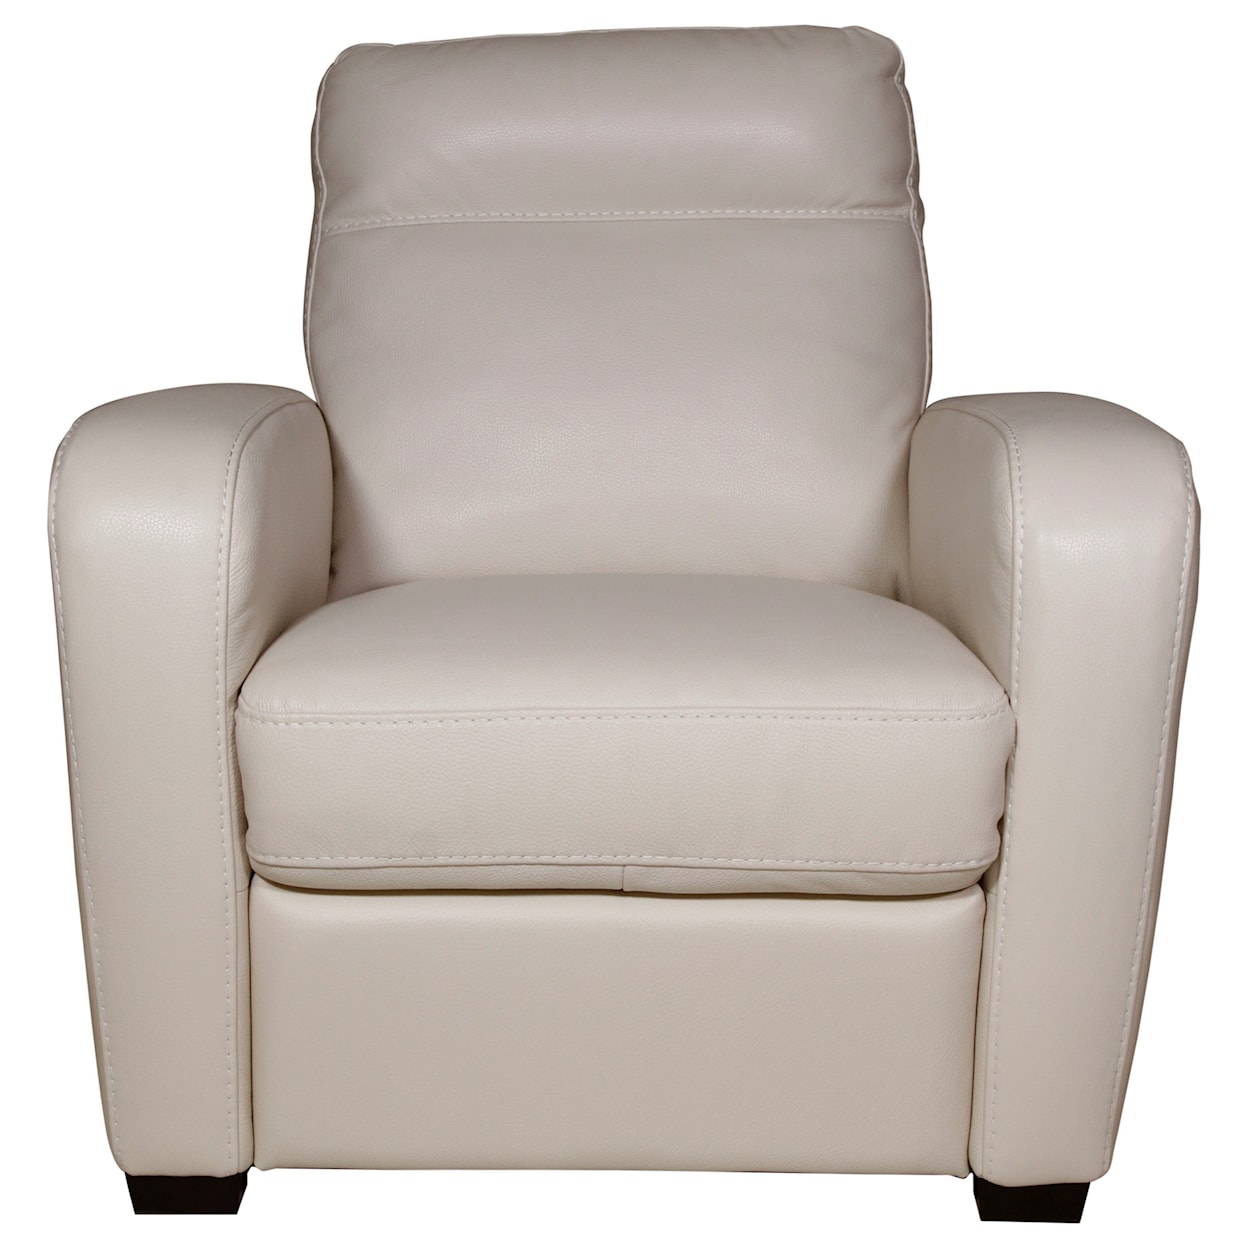 Natuzzi Editions 100% Italian Leather Leather Power Recliner